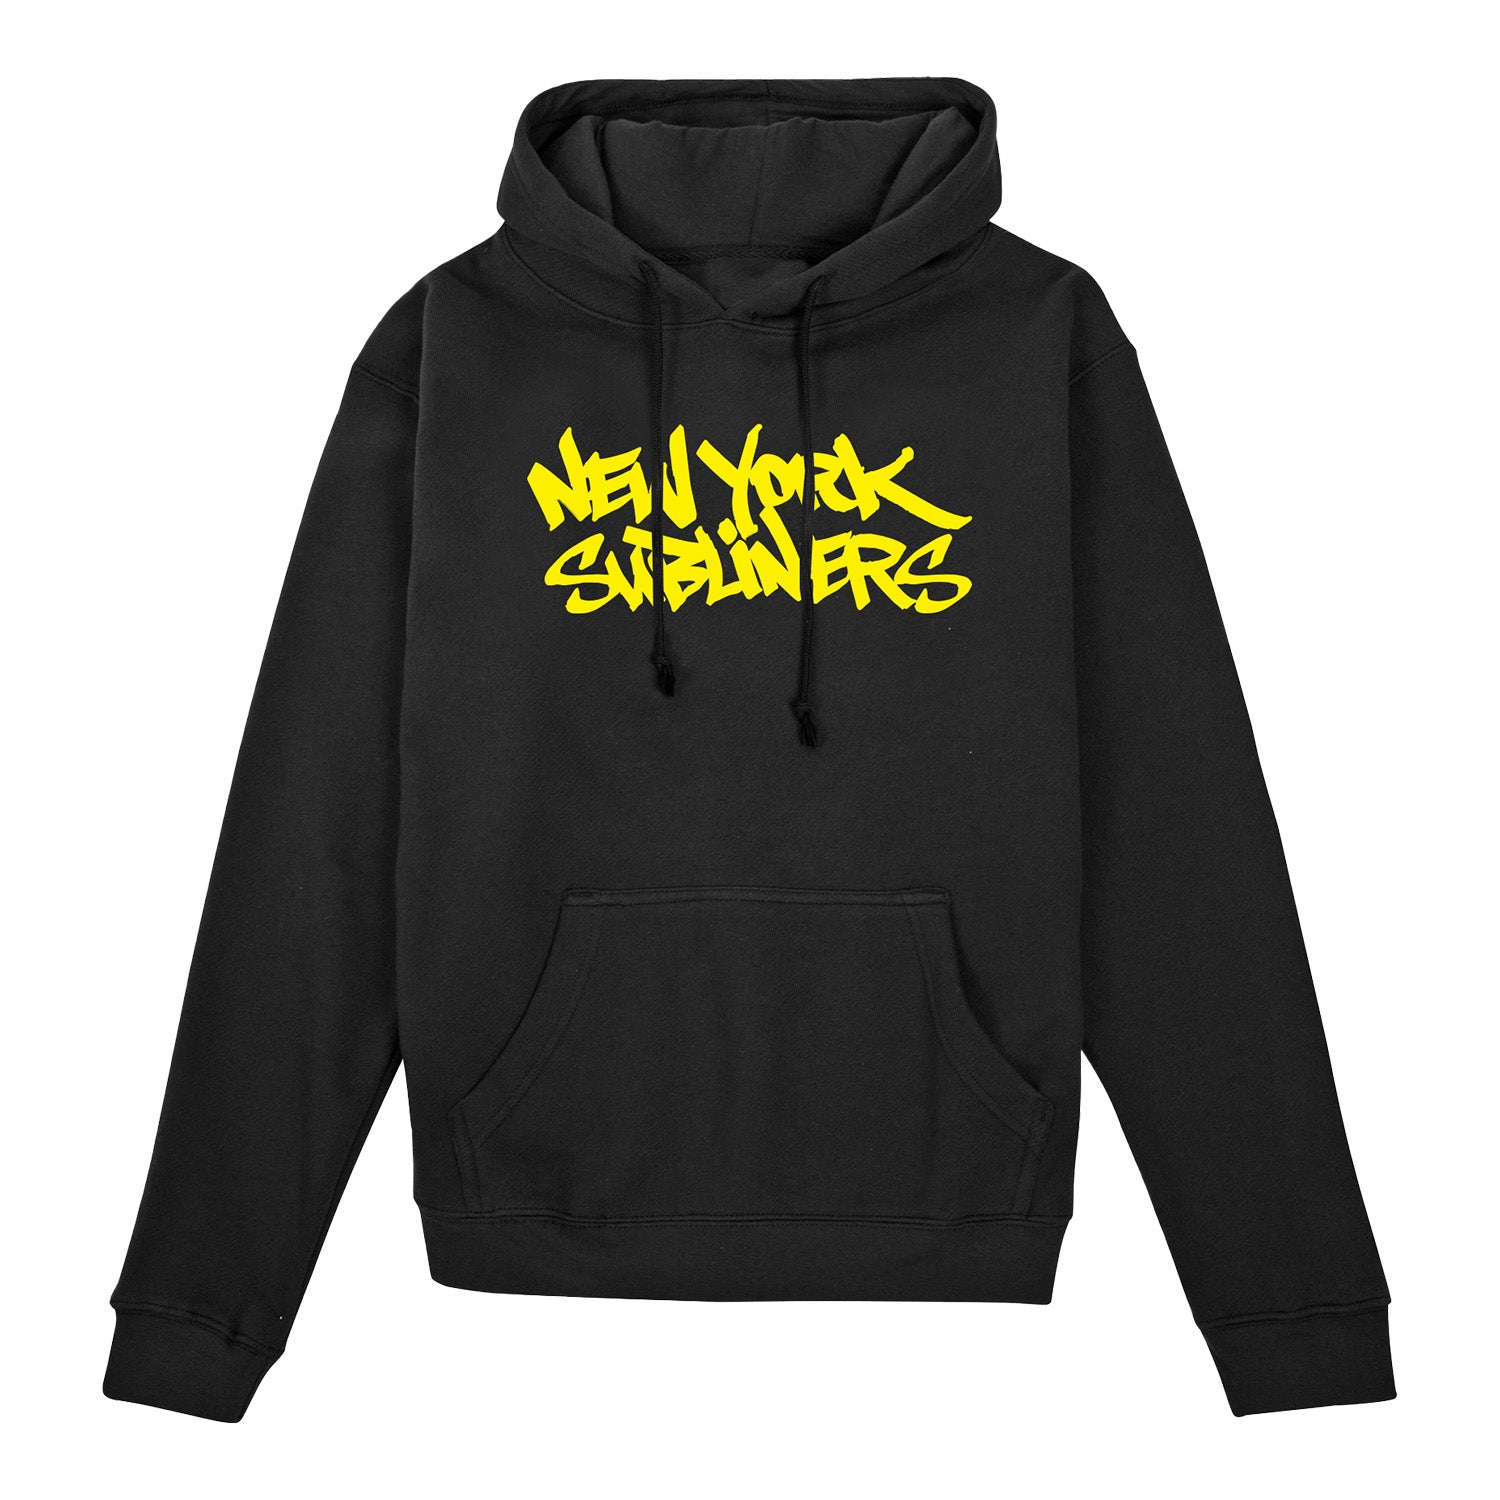 New York Subliners Ghost Logo Black Hoodie - Front View